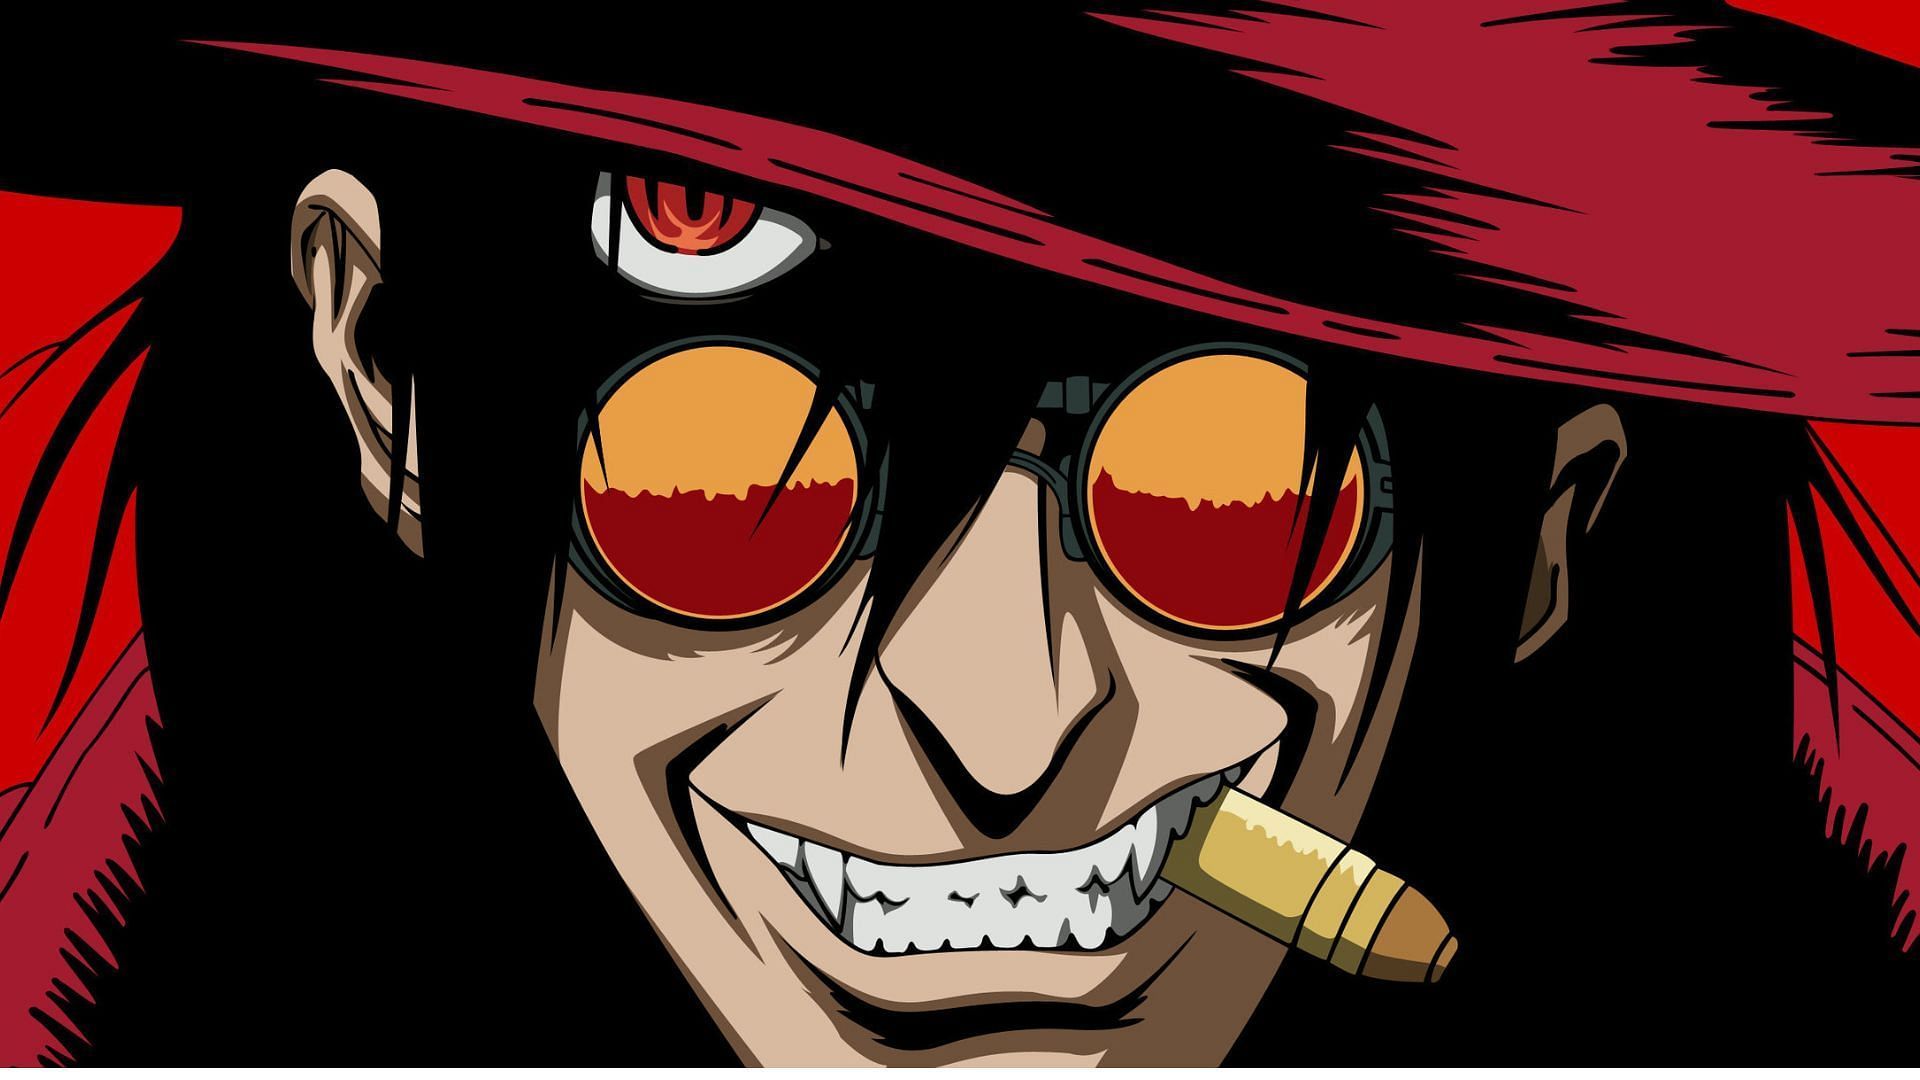 Where to watch Hellsing anime? Streaming details explored